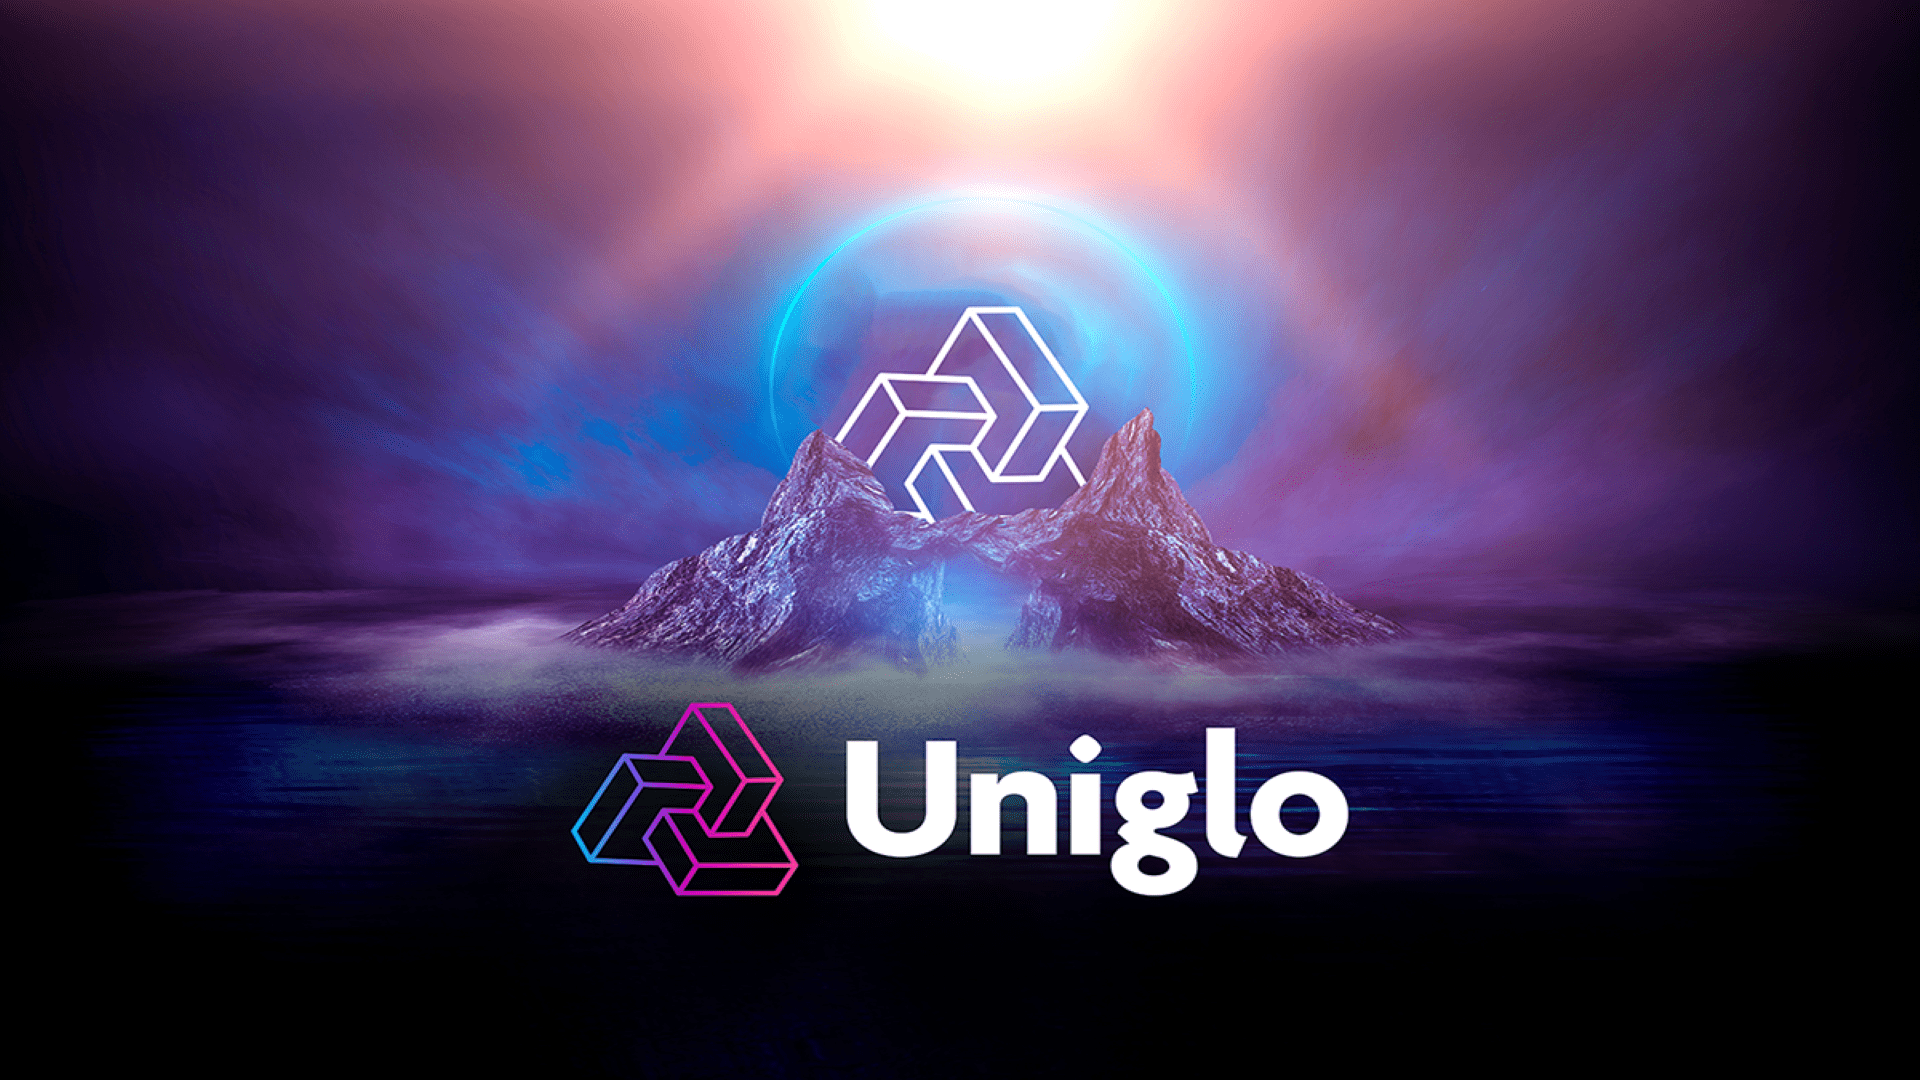 uniglo-glo-polygon-matic-and-stellar-xlm-could-pave-the-way-for-investors-to-become-future-millionaires-the-coin-republic-cryptocurrency-bitcoin-ethereum-and-amp-blockchain-news